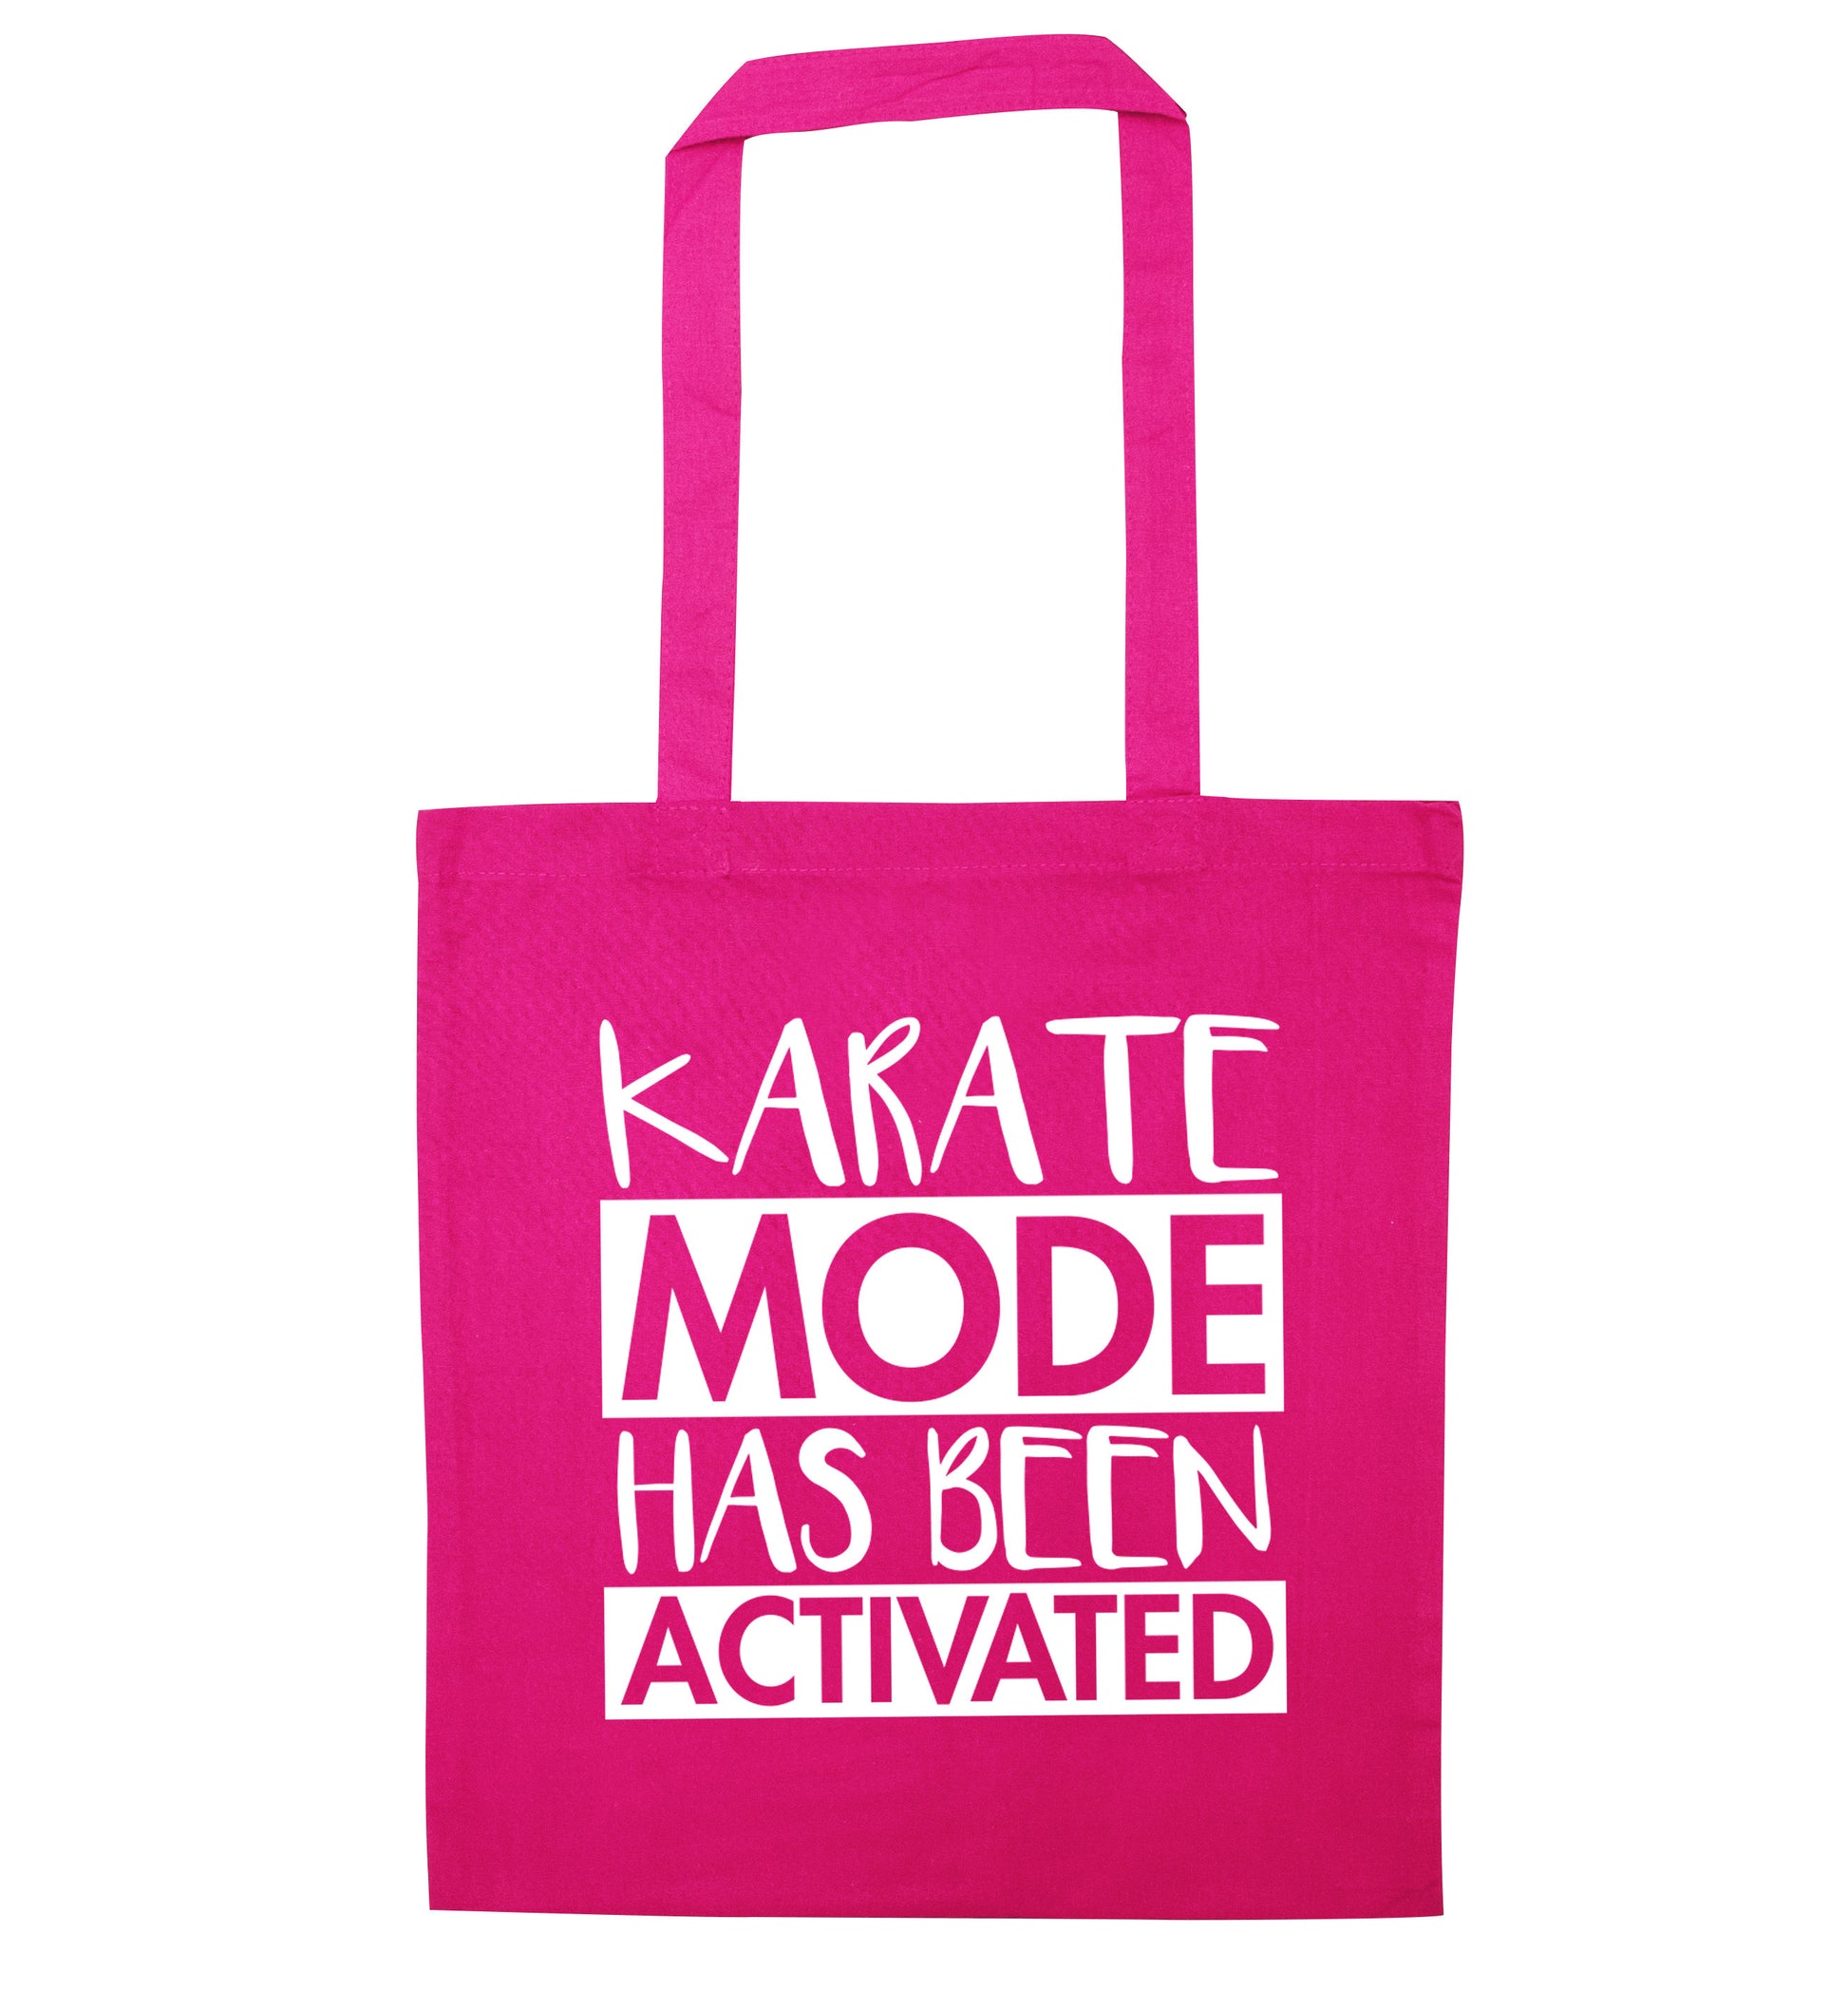 Karate mode activated pink tote bag